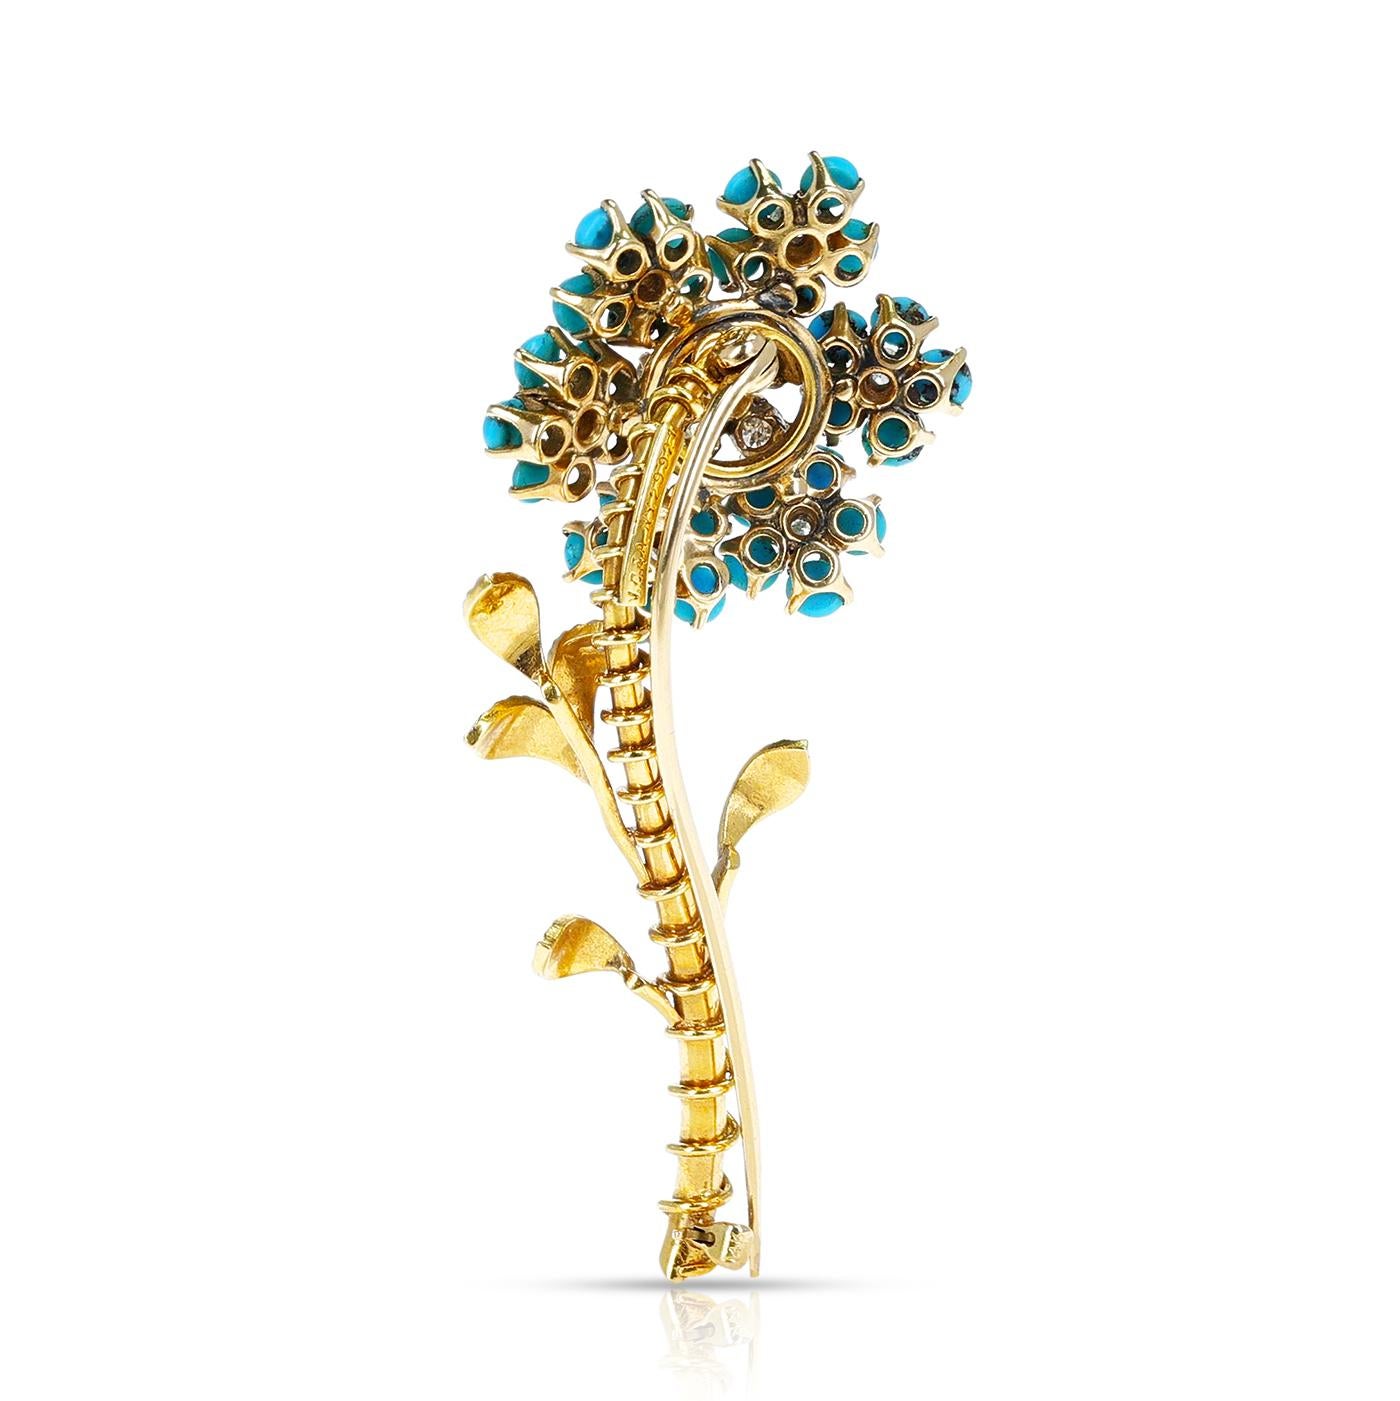 A beautiful Van Cleef & Arpels Turquoise and Diamond Flower Brooch with work on the stem and leaves of the flower. The total weight of the 15 grams. The length is 2 5/8.